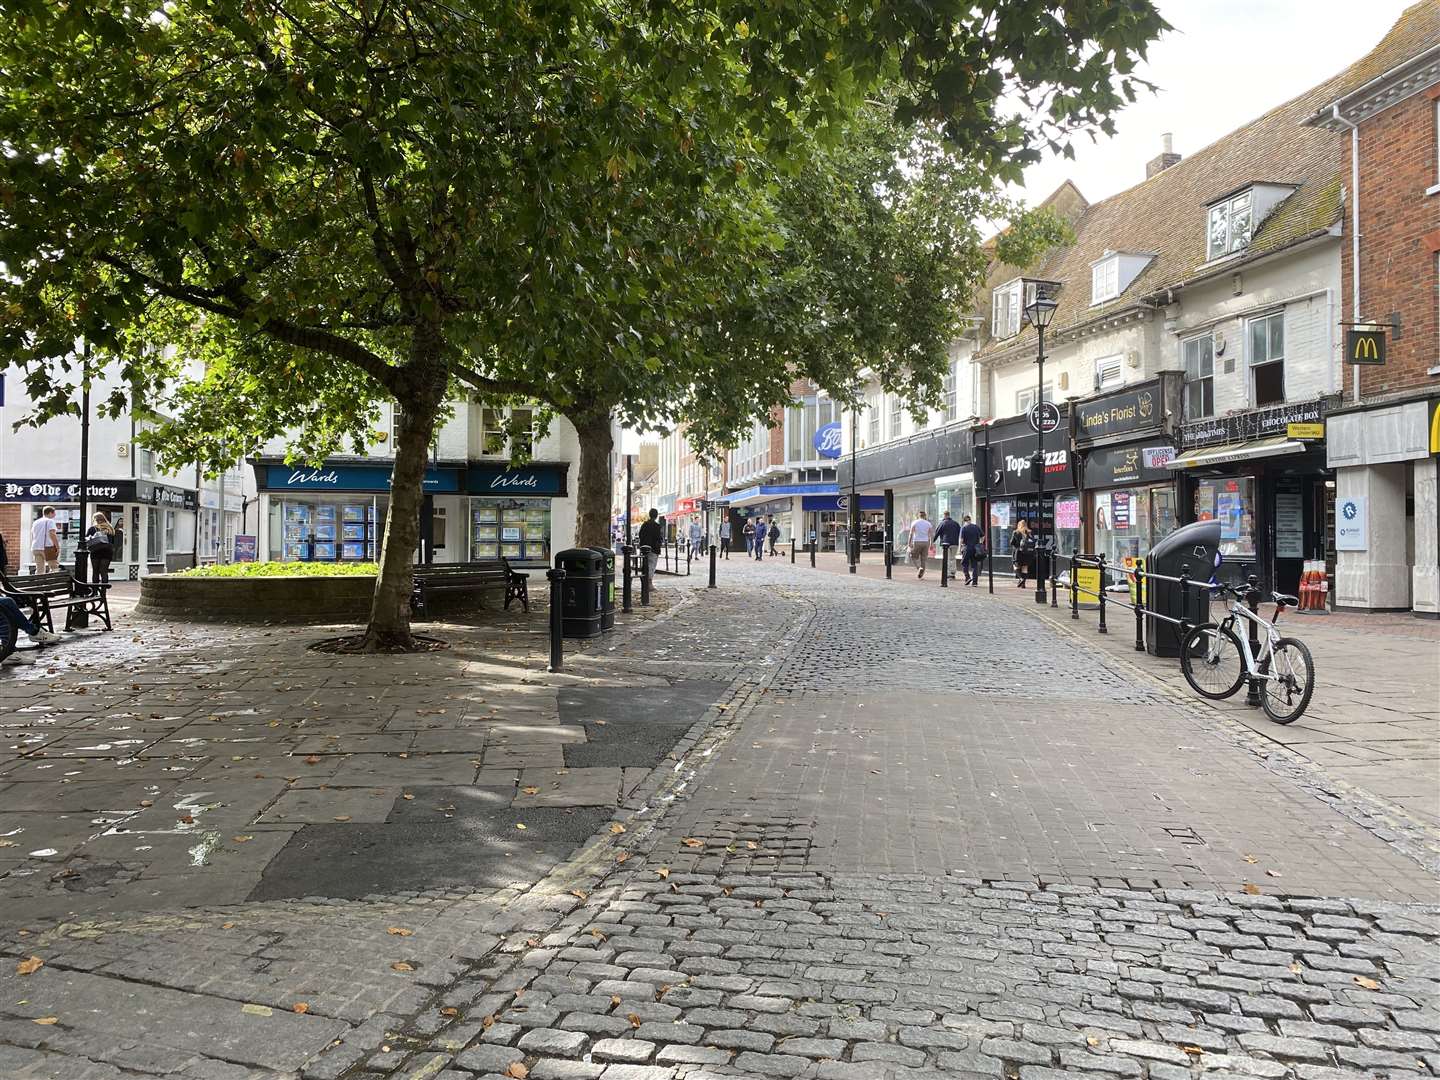 Officers on patrol responded to the incident in Ashford high street